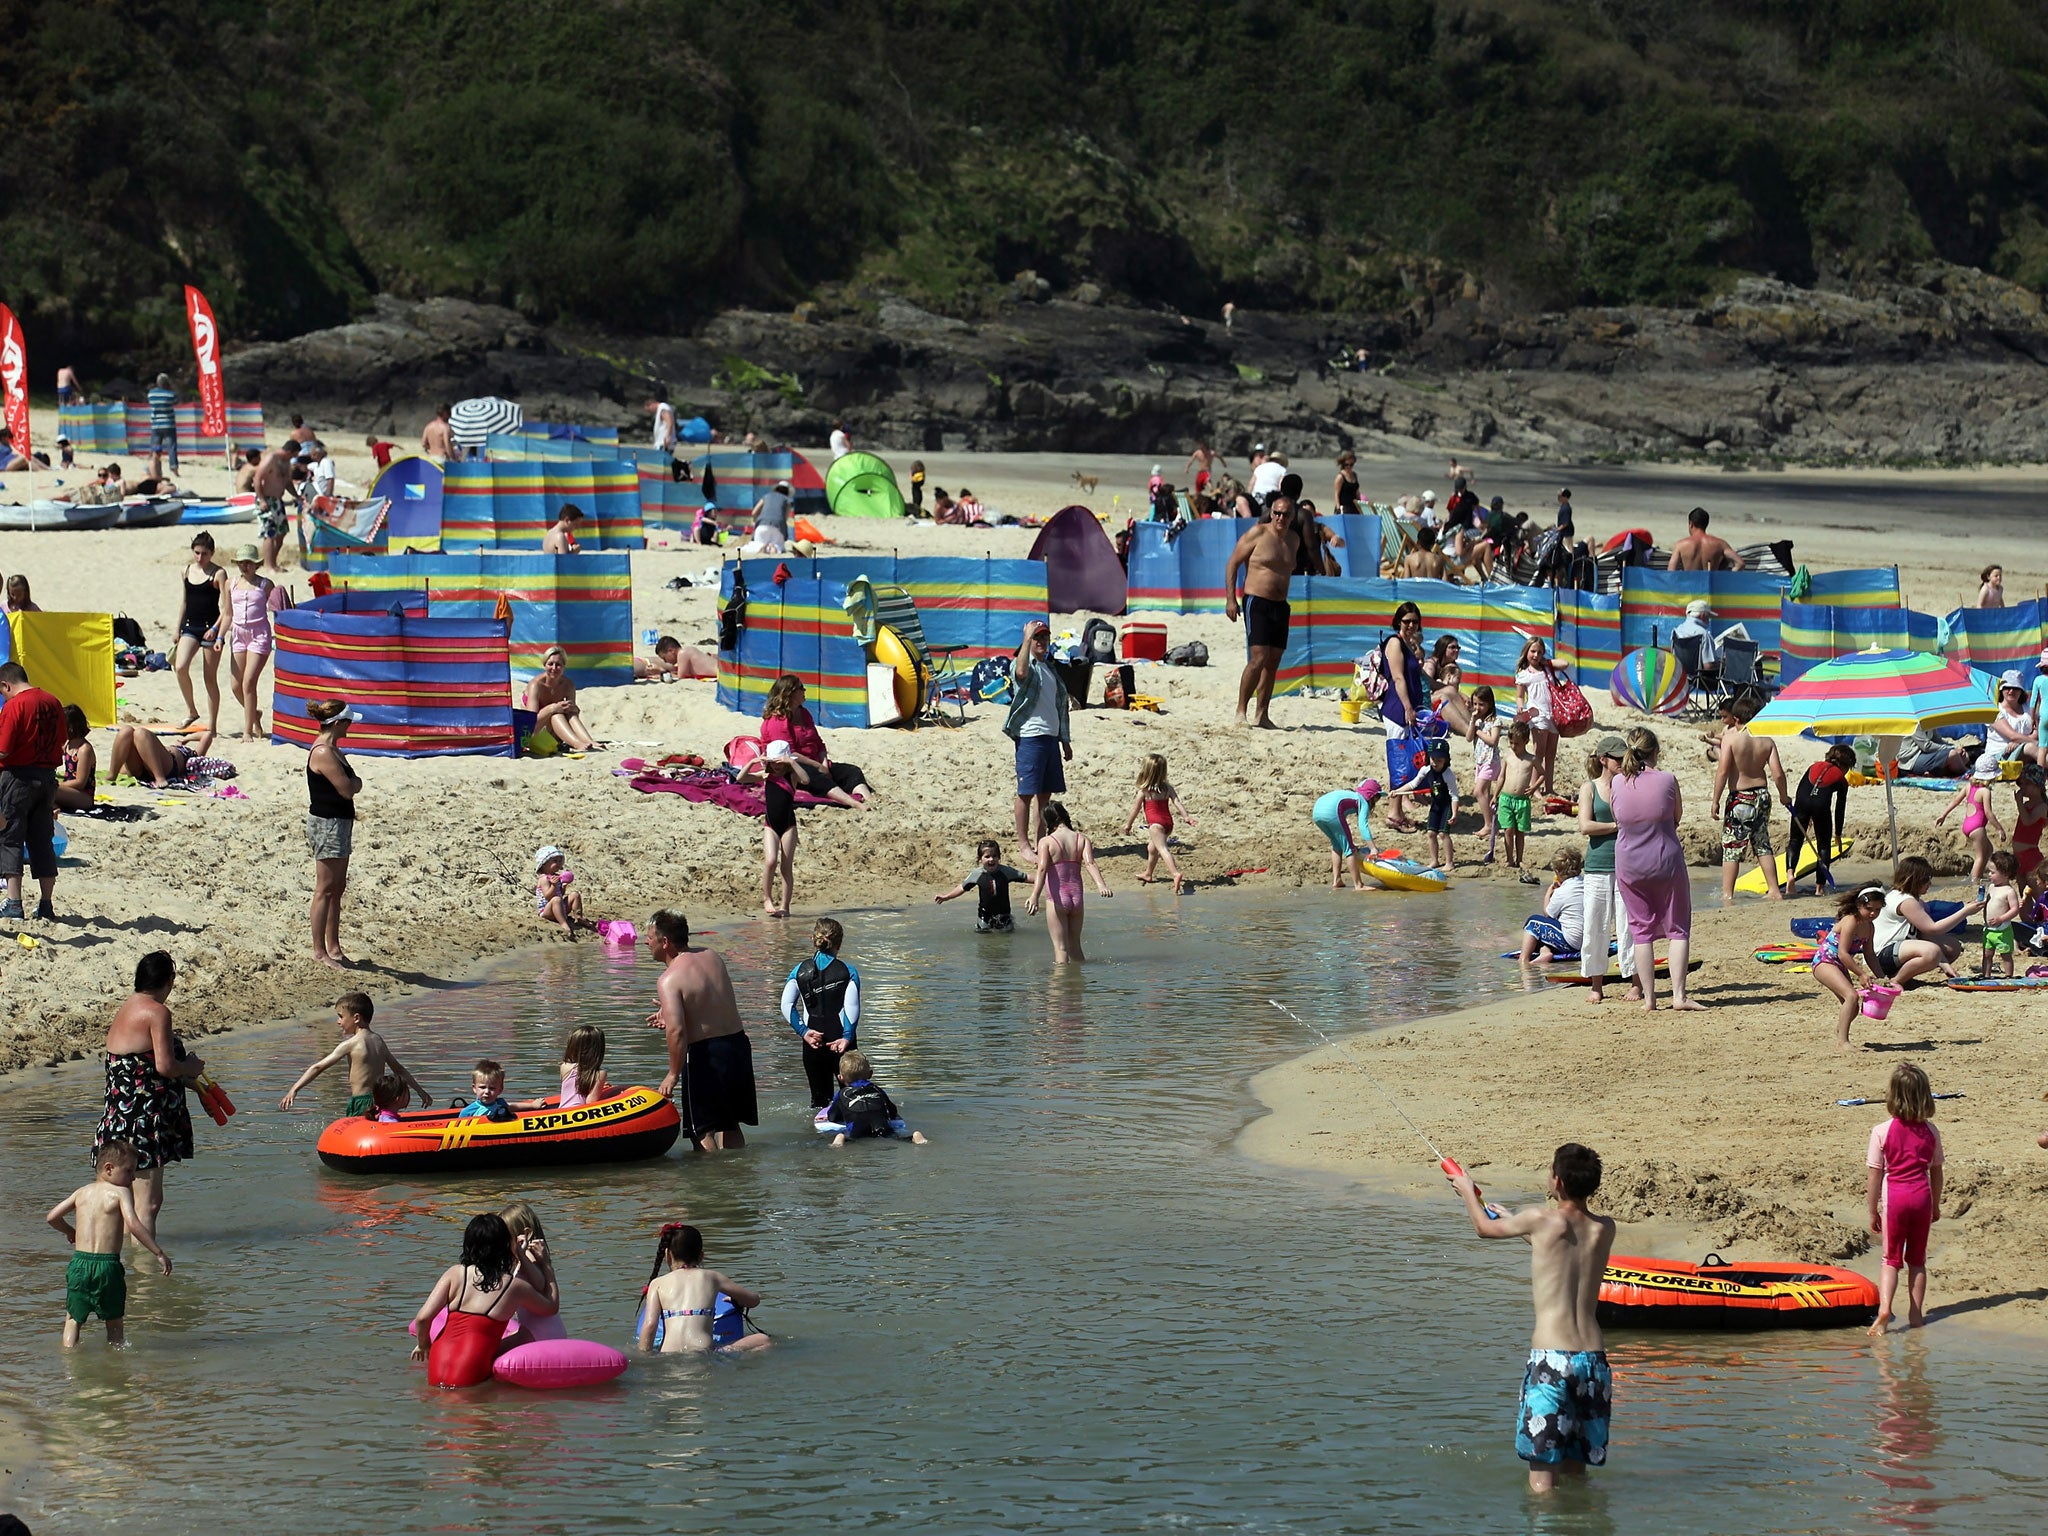 People enjoy the fine weather in St Ives, Cornwall, England on an Easter weekend.